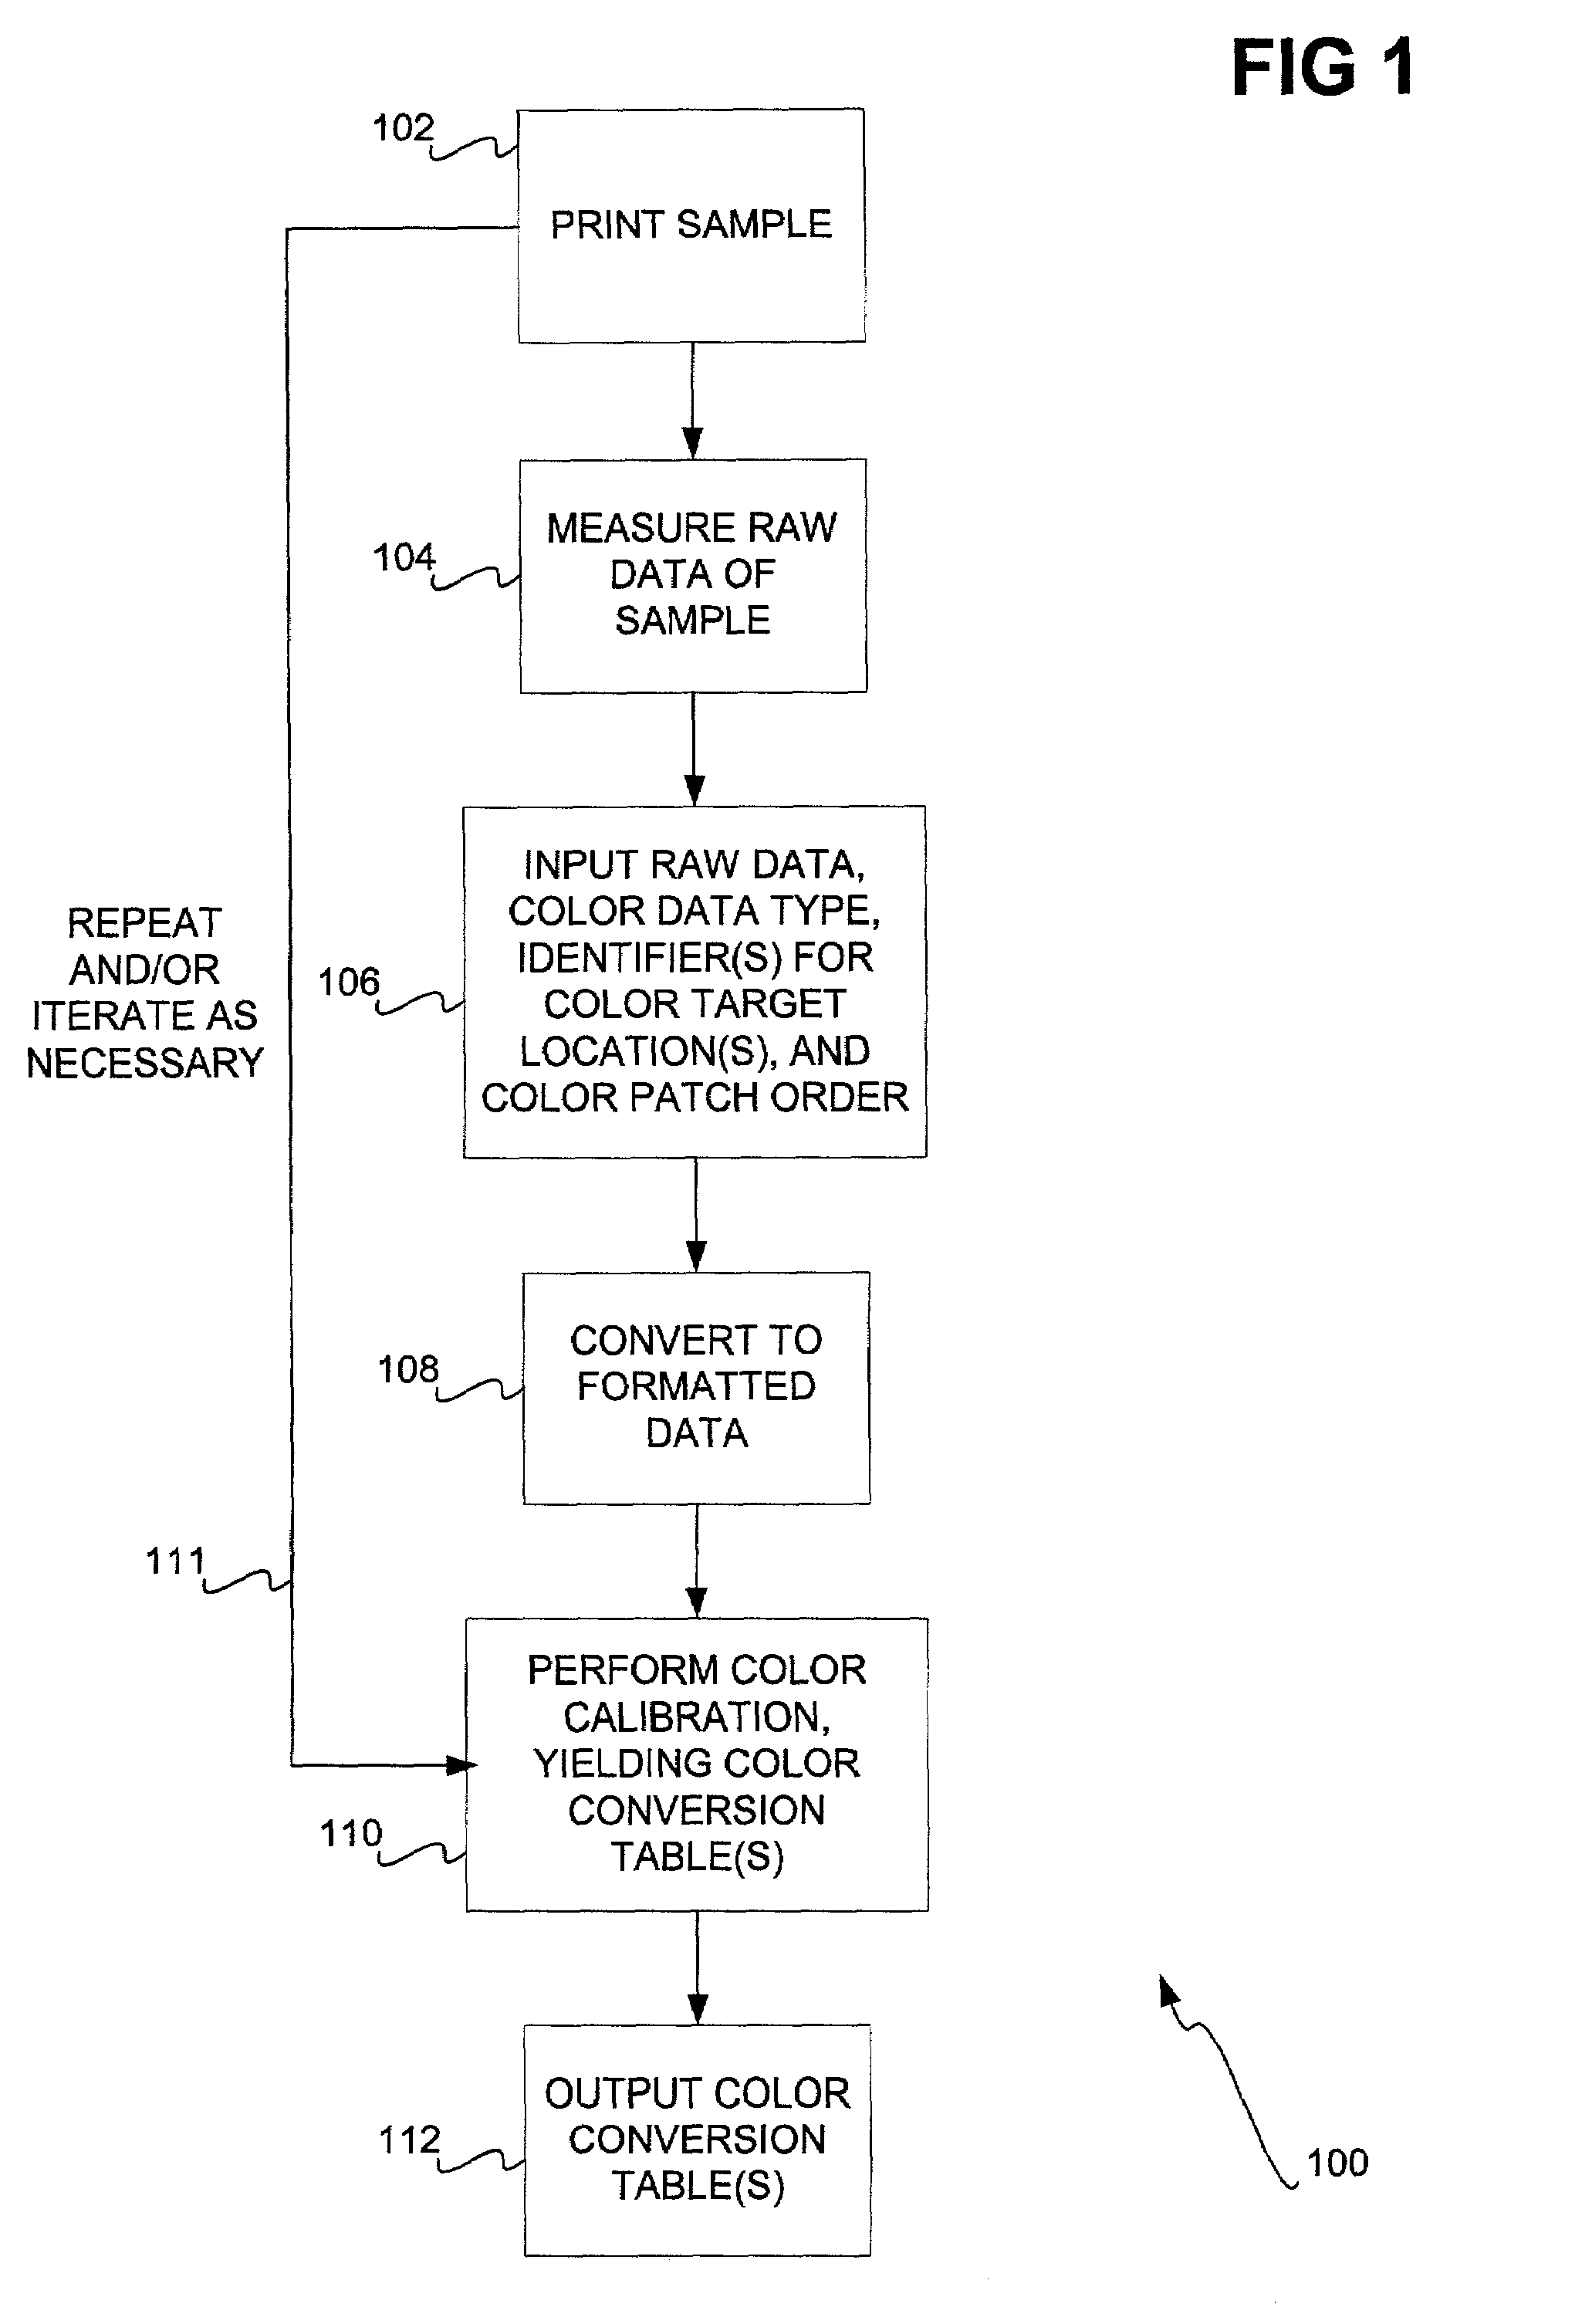 Generalized color calibration architecture and method